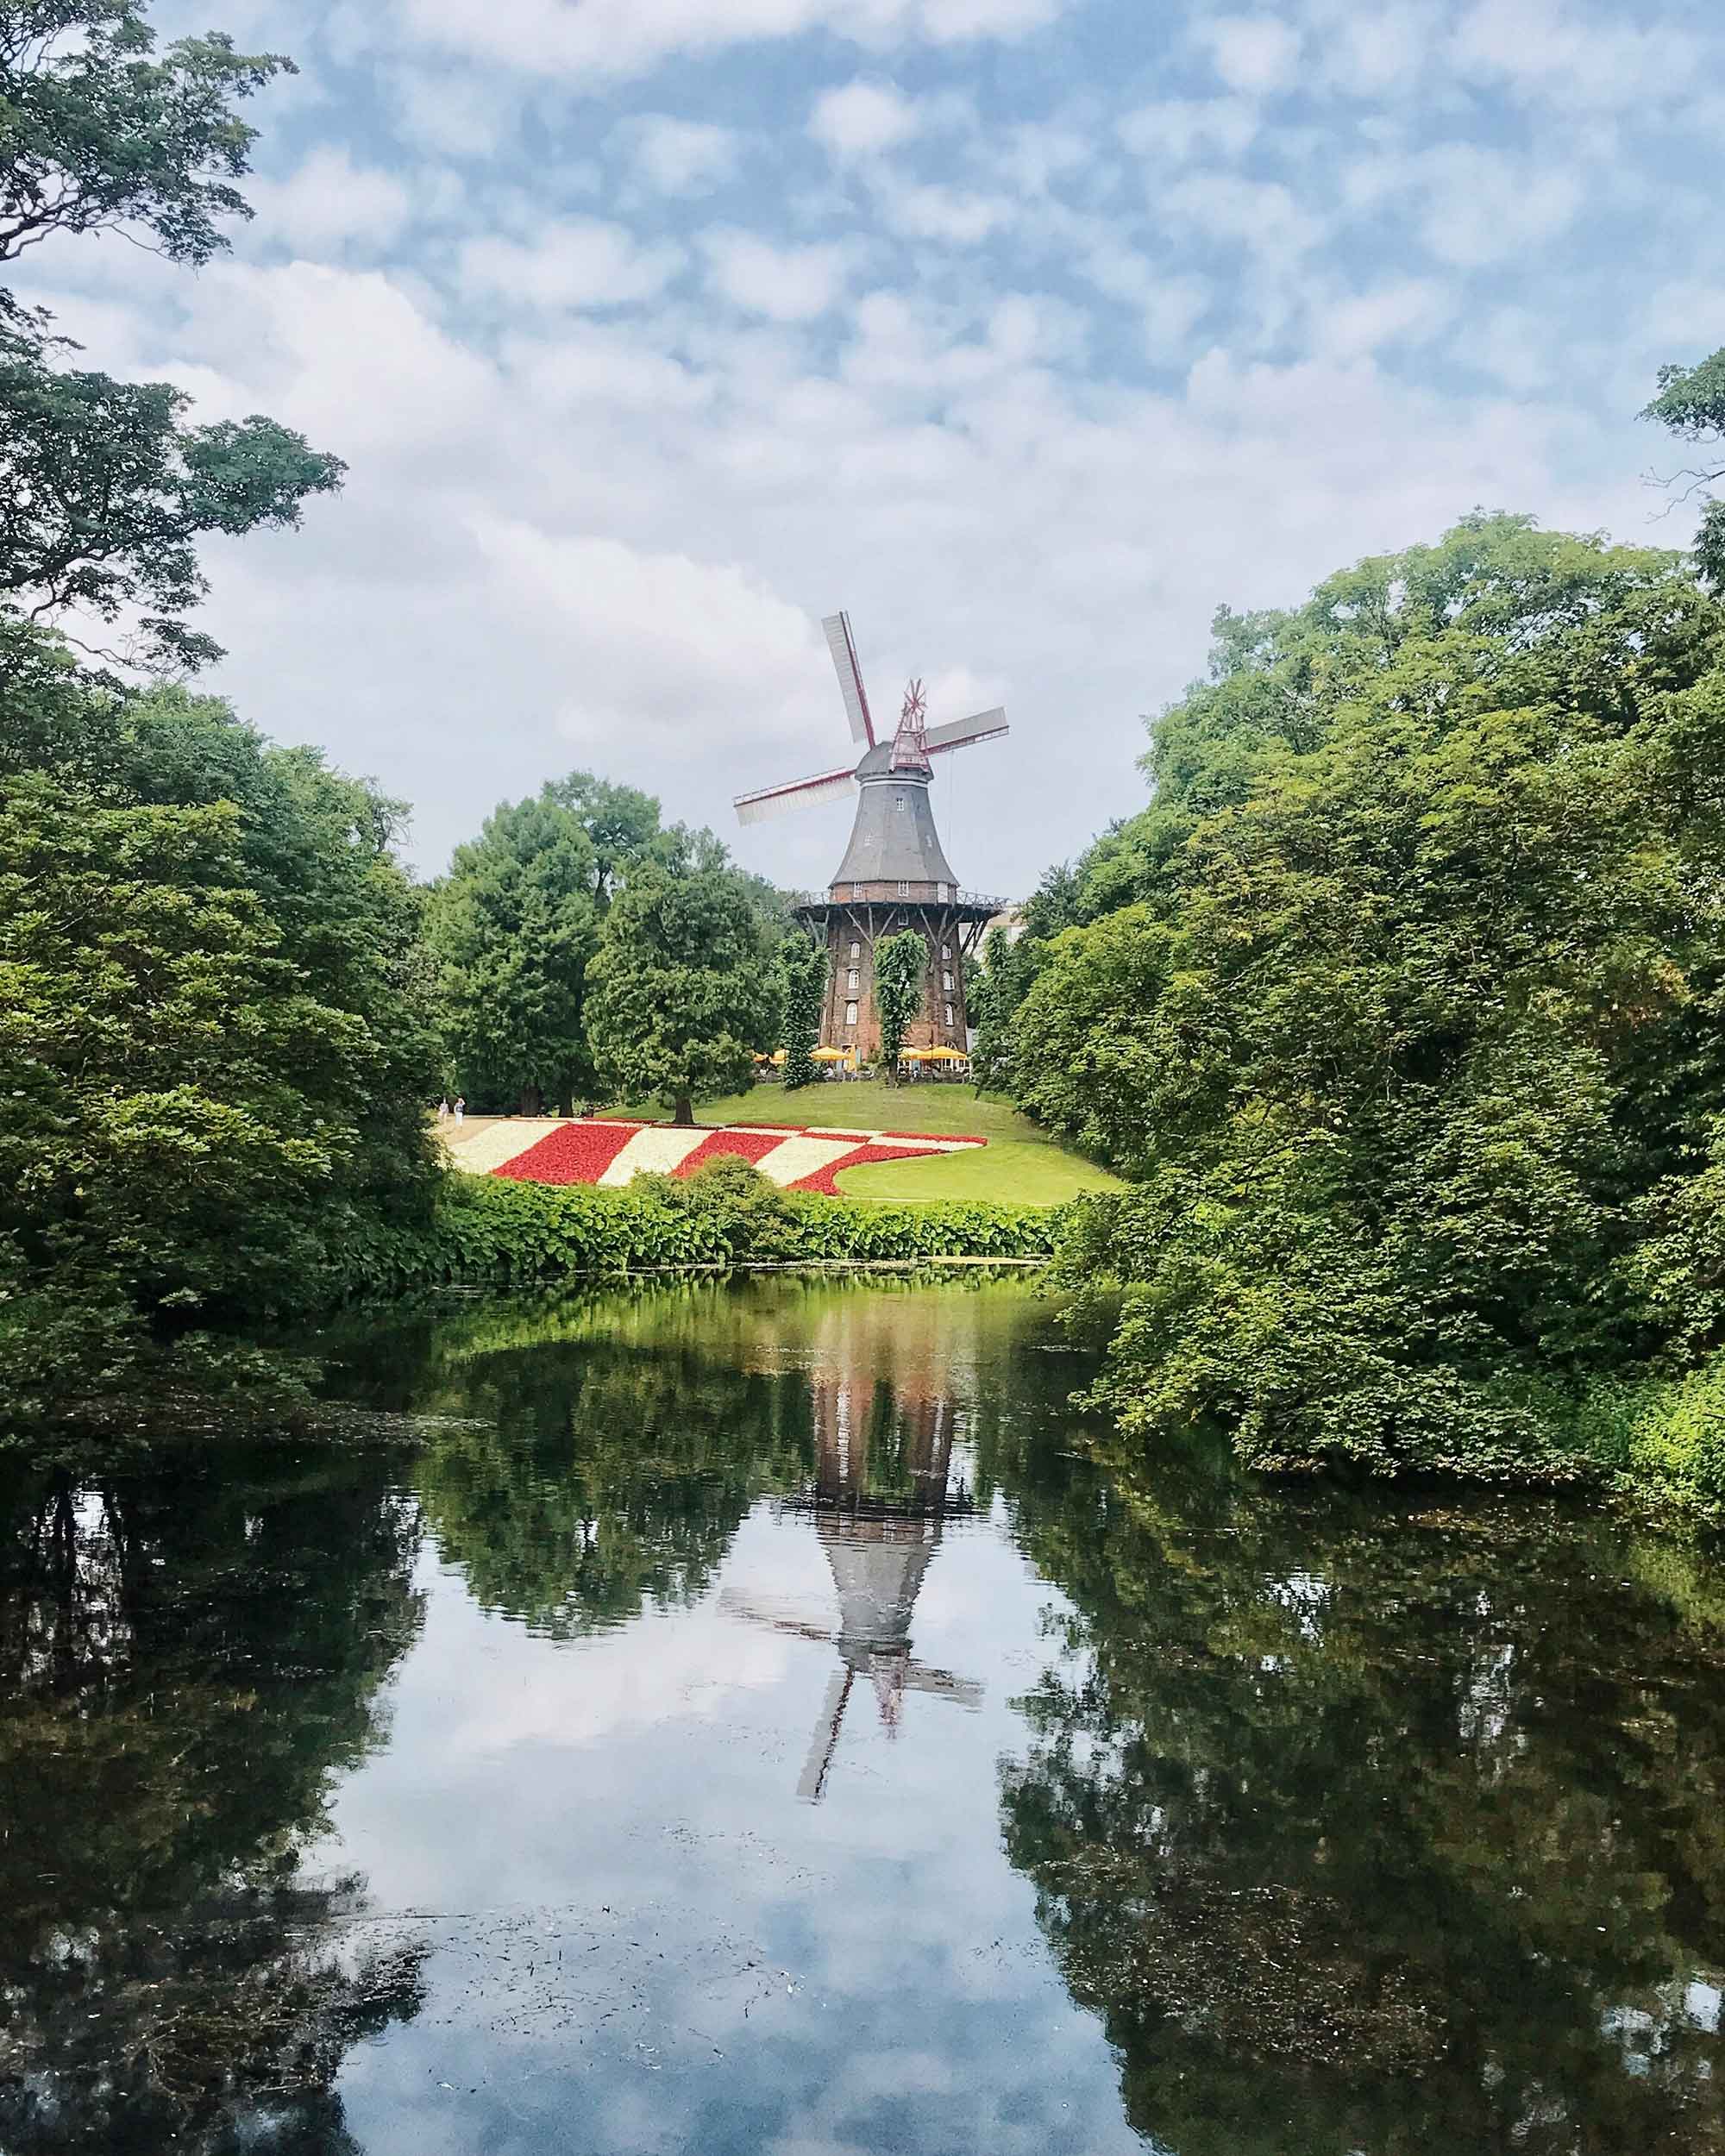 A pond in a park with a mill in the background